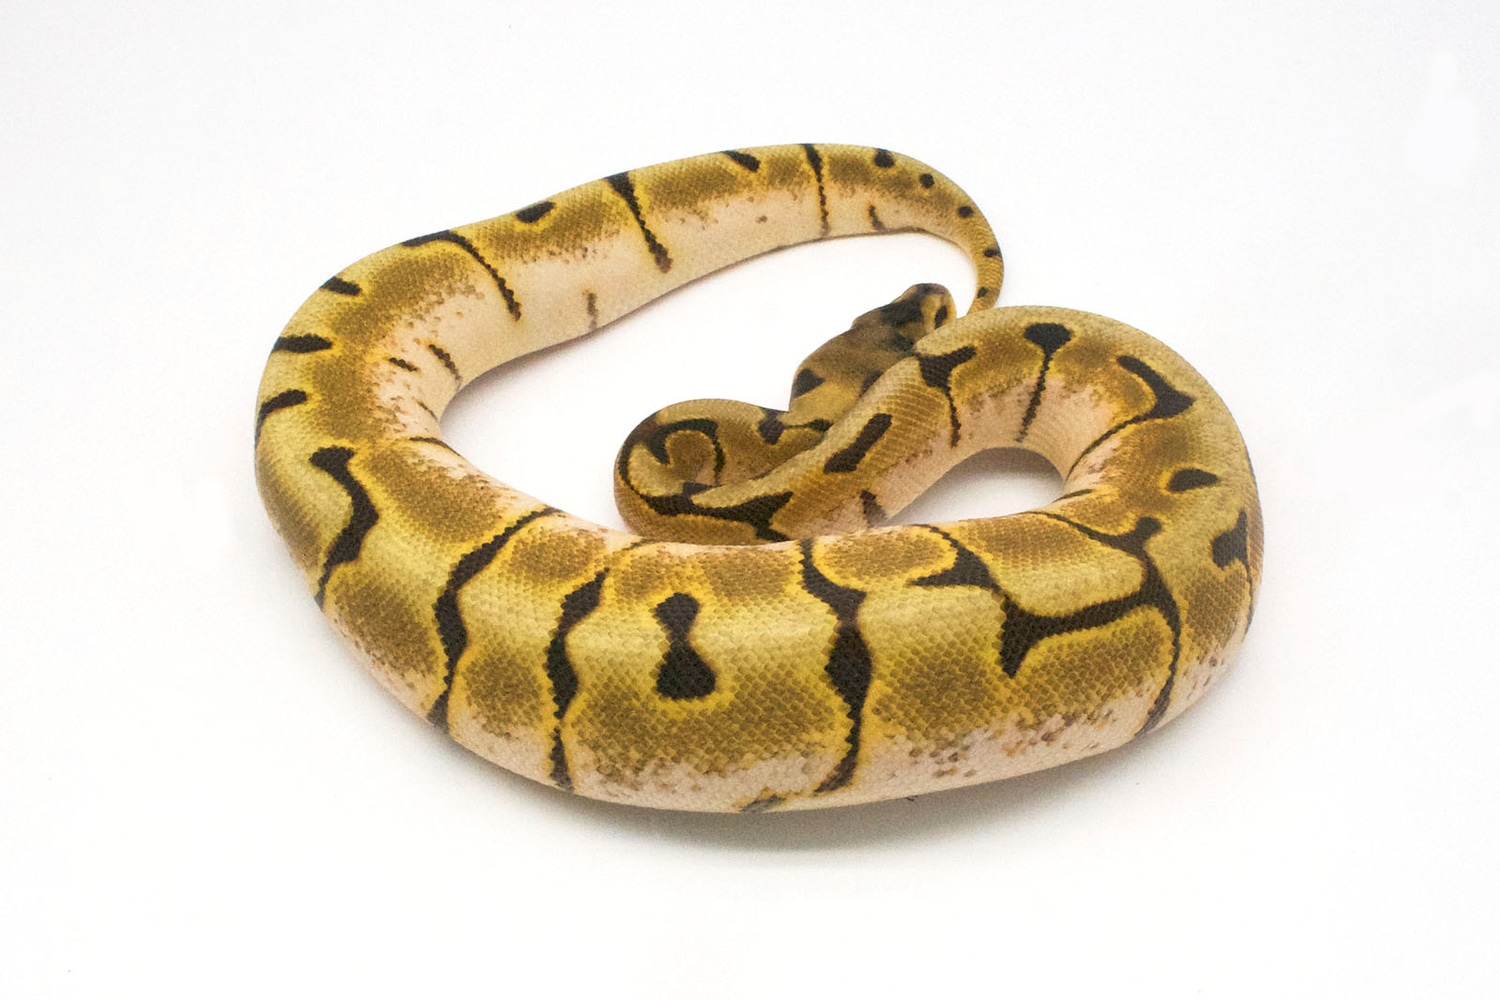 Spider Enchi EMG Het. Ghost Ball Python by New England Reptile Distributors